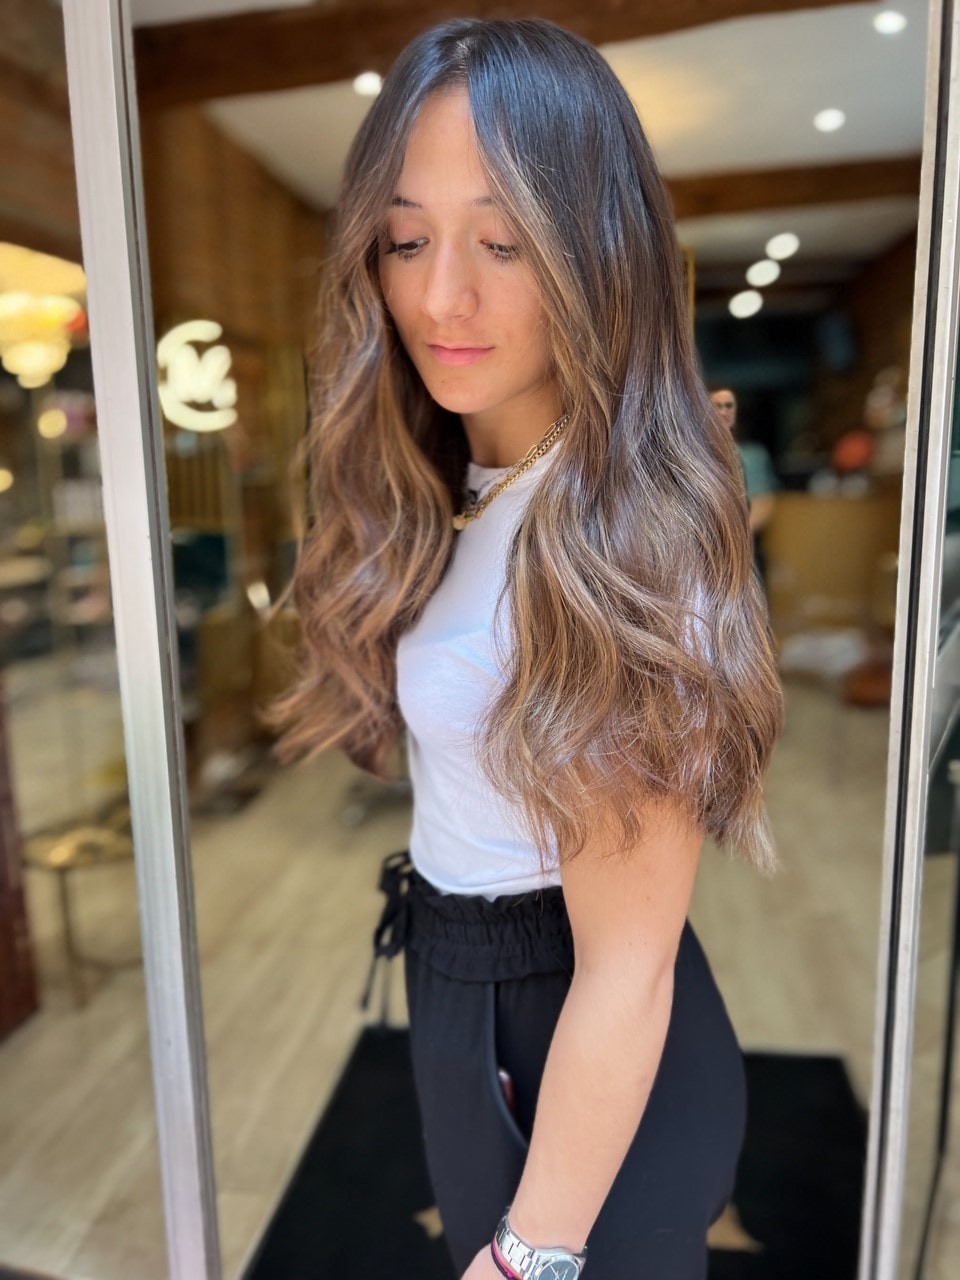 coiffeur Toulouse Carmes - Balayage naturel contouring - By Mélanie